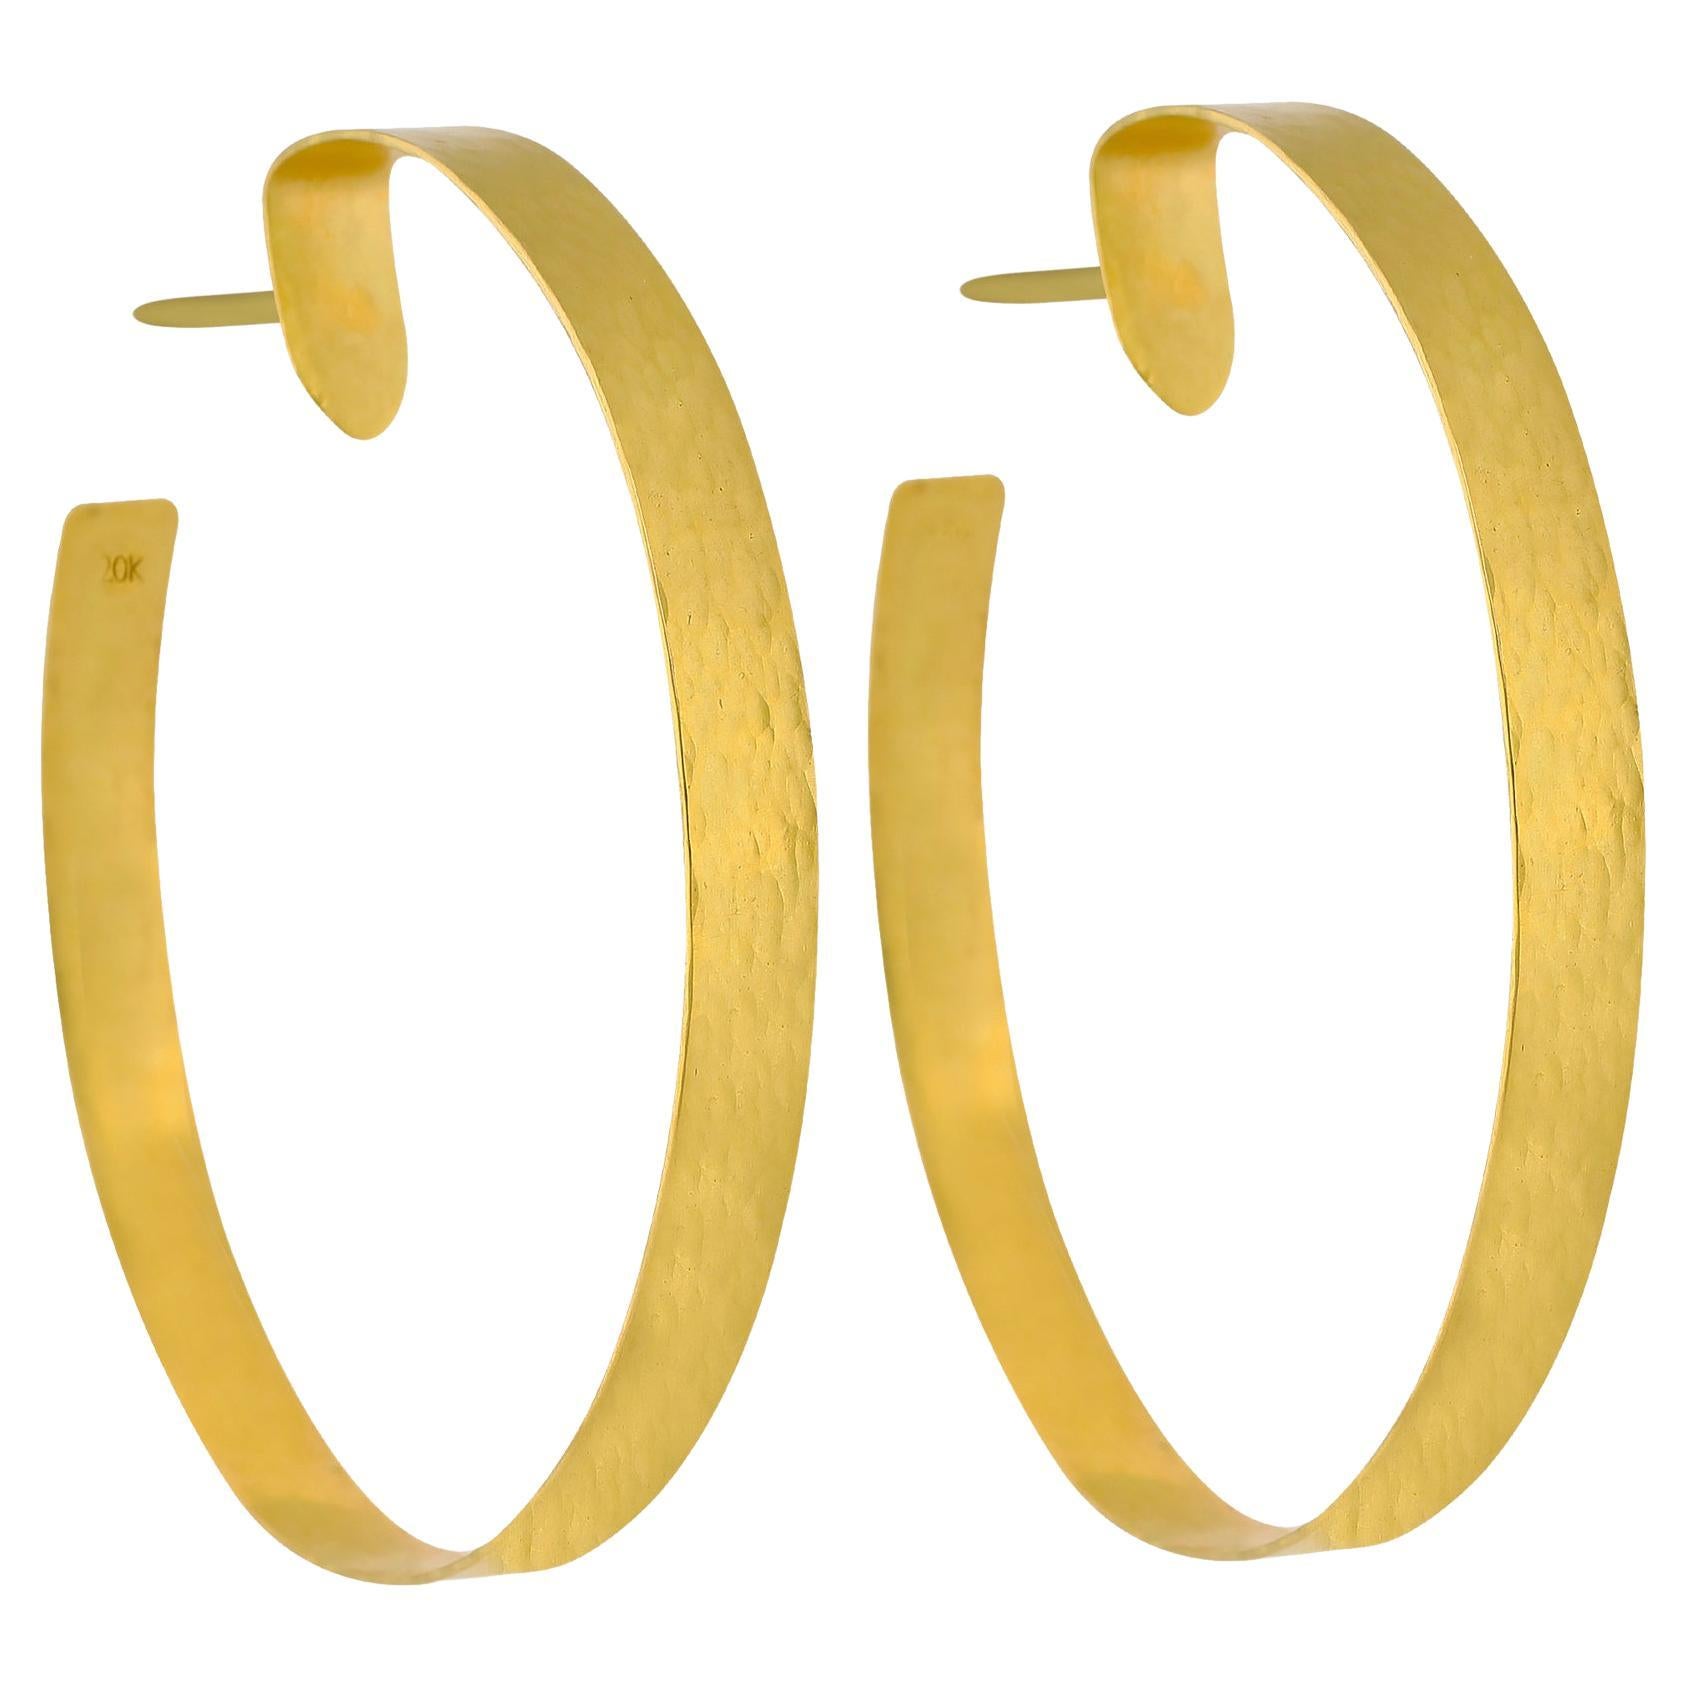 PHILIPPE SPENCER Solid 20K Gold 2" Inch Hand-Forged & Hammered Hoop Earrings For Sale